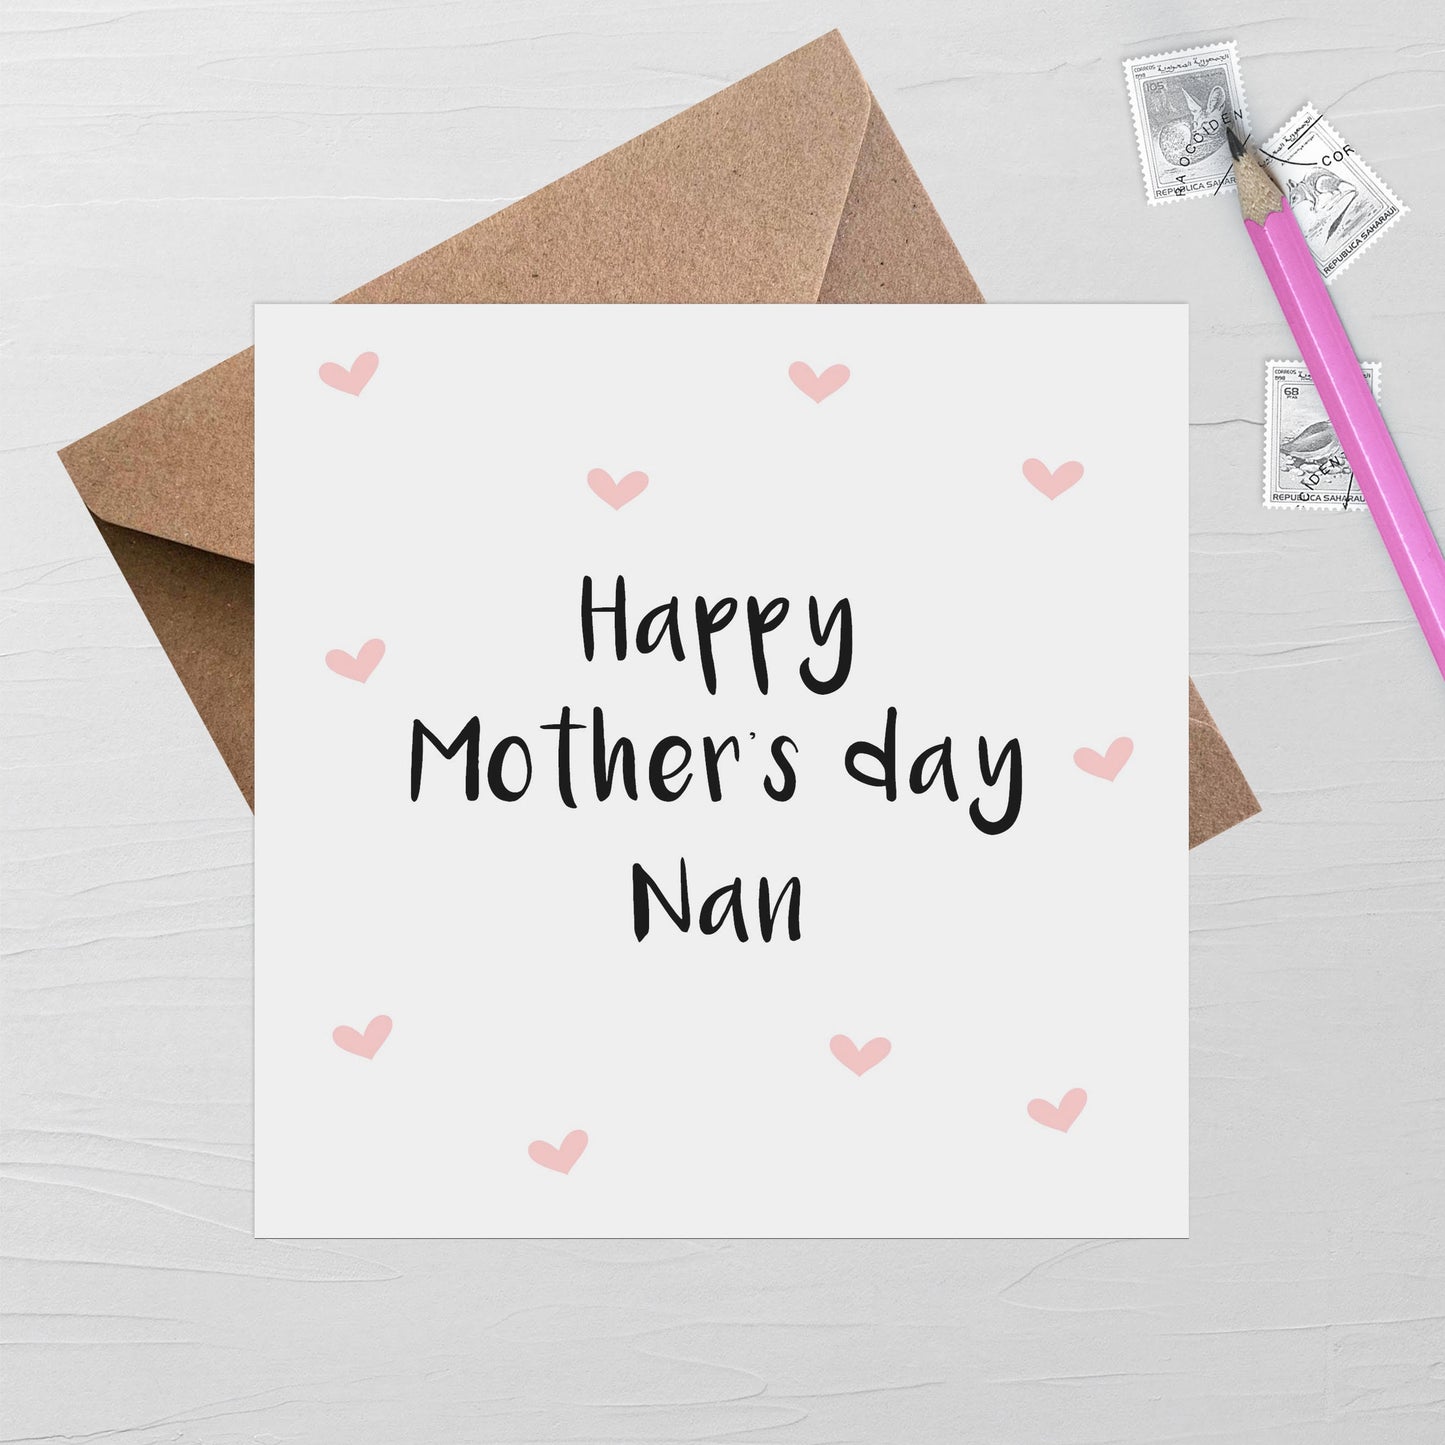 Happy Mother's Day Nan, Pink Heart Card